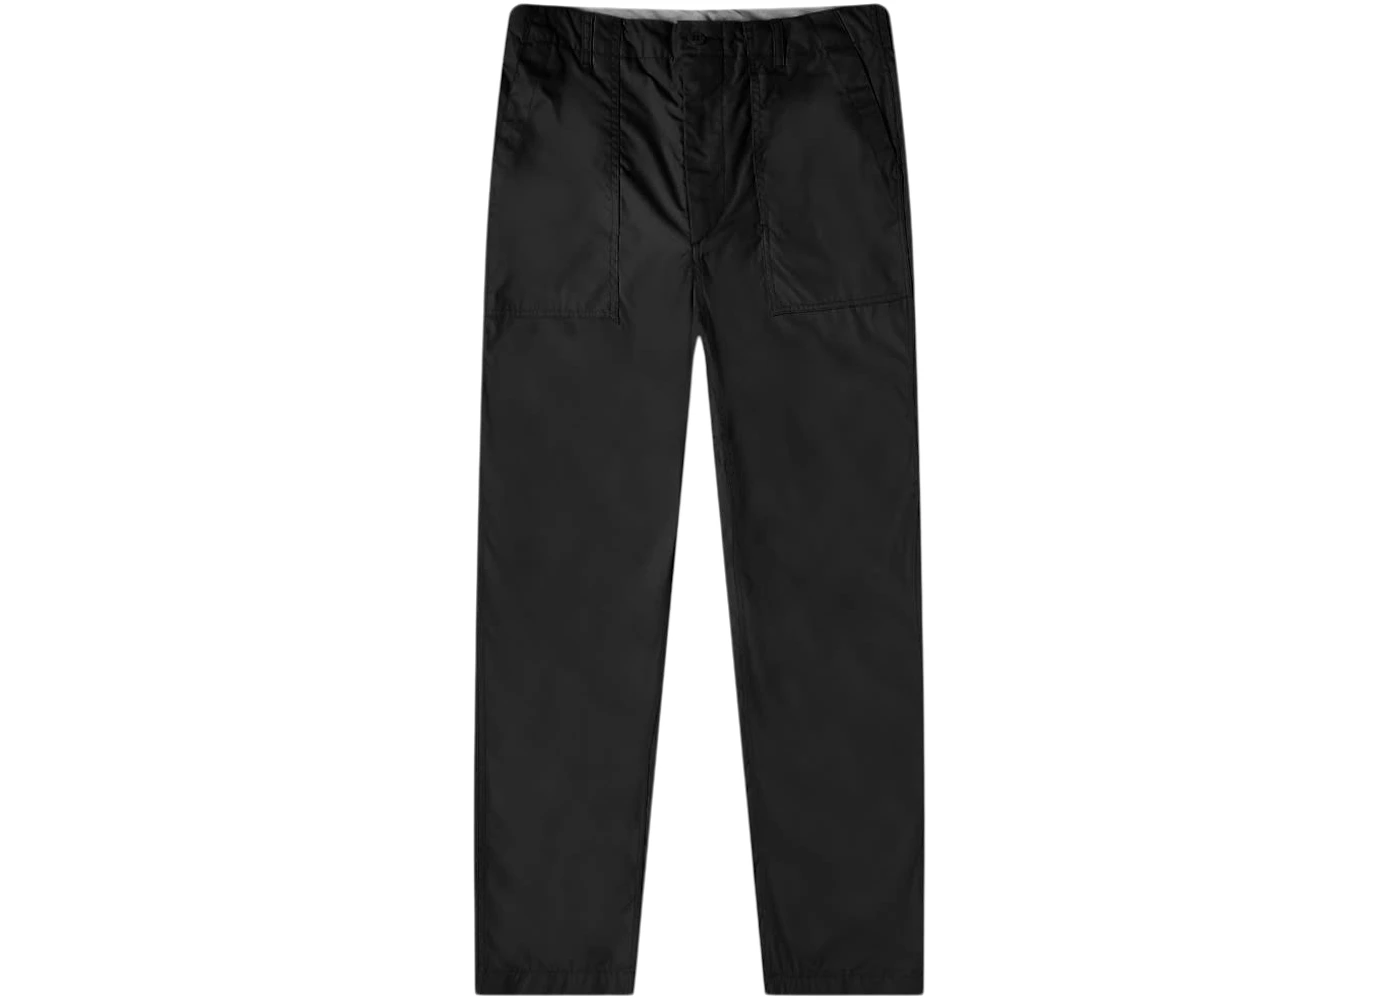 Engineered Garments Fatigue Coated Twill Pant Black - SS22 Men's - GB